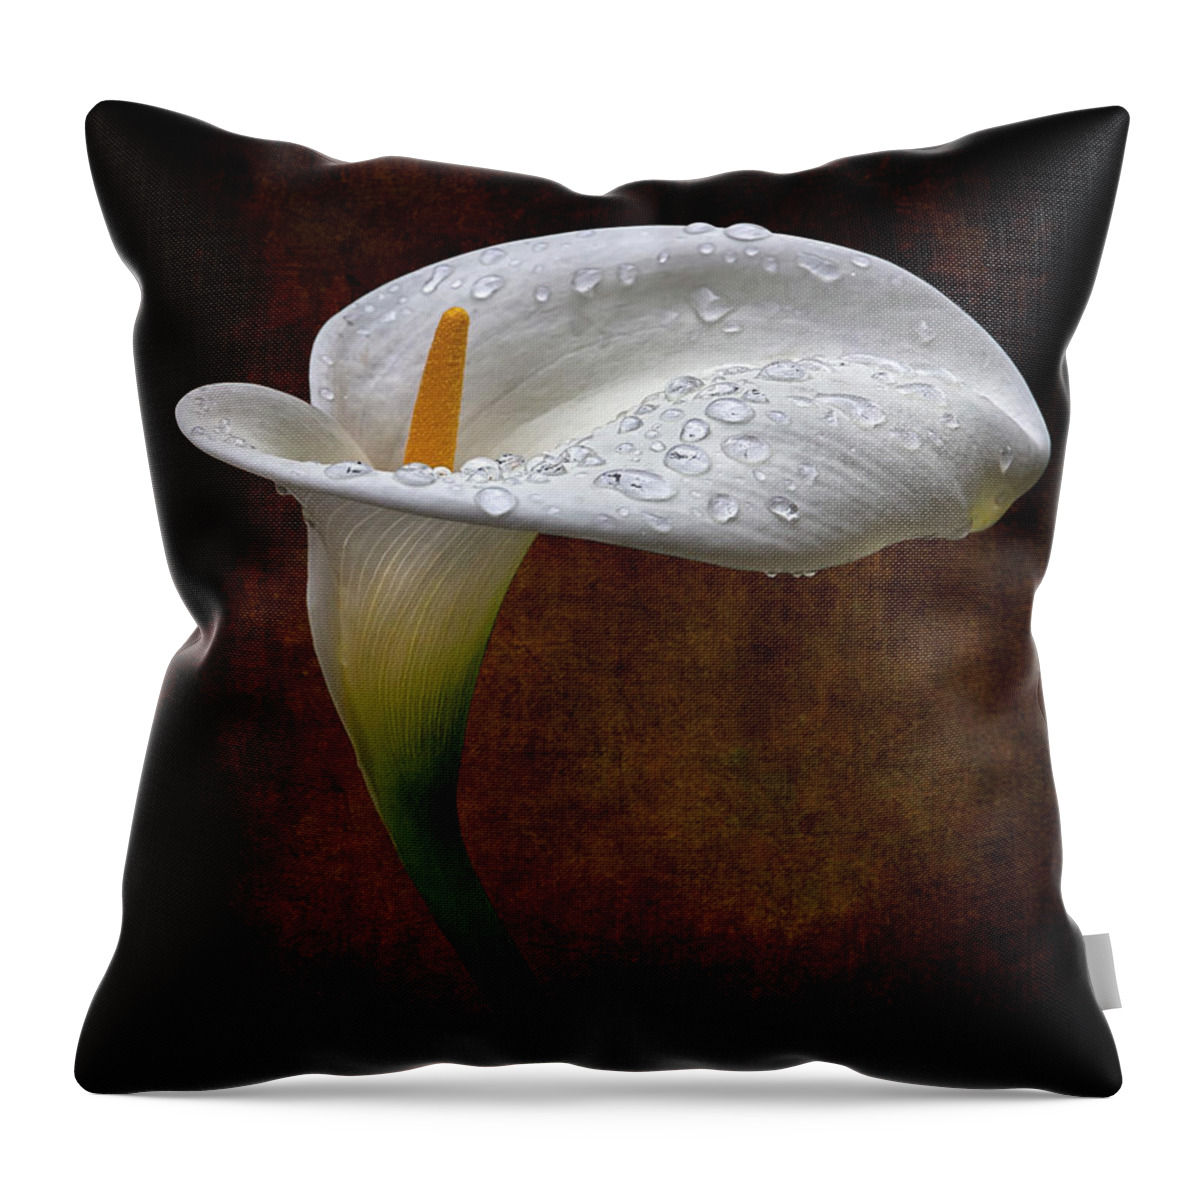 Calla Lily Throw Pillow featuring the photograph Rainwater On A Calla Lily by Endre Balogh